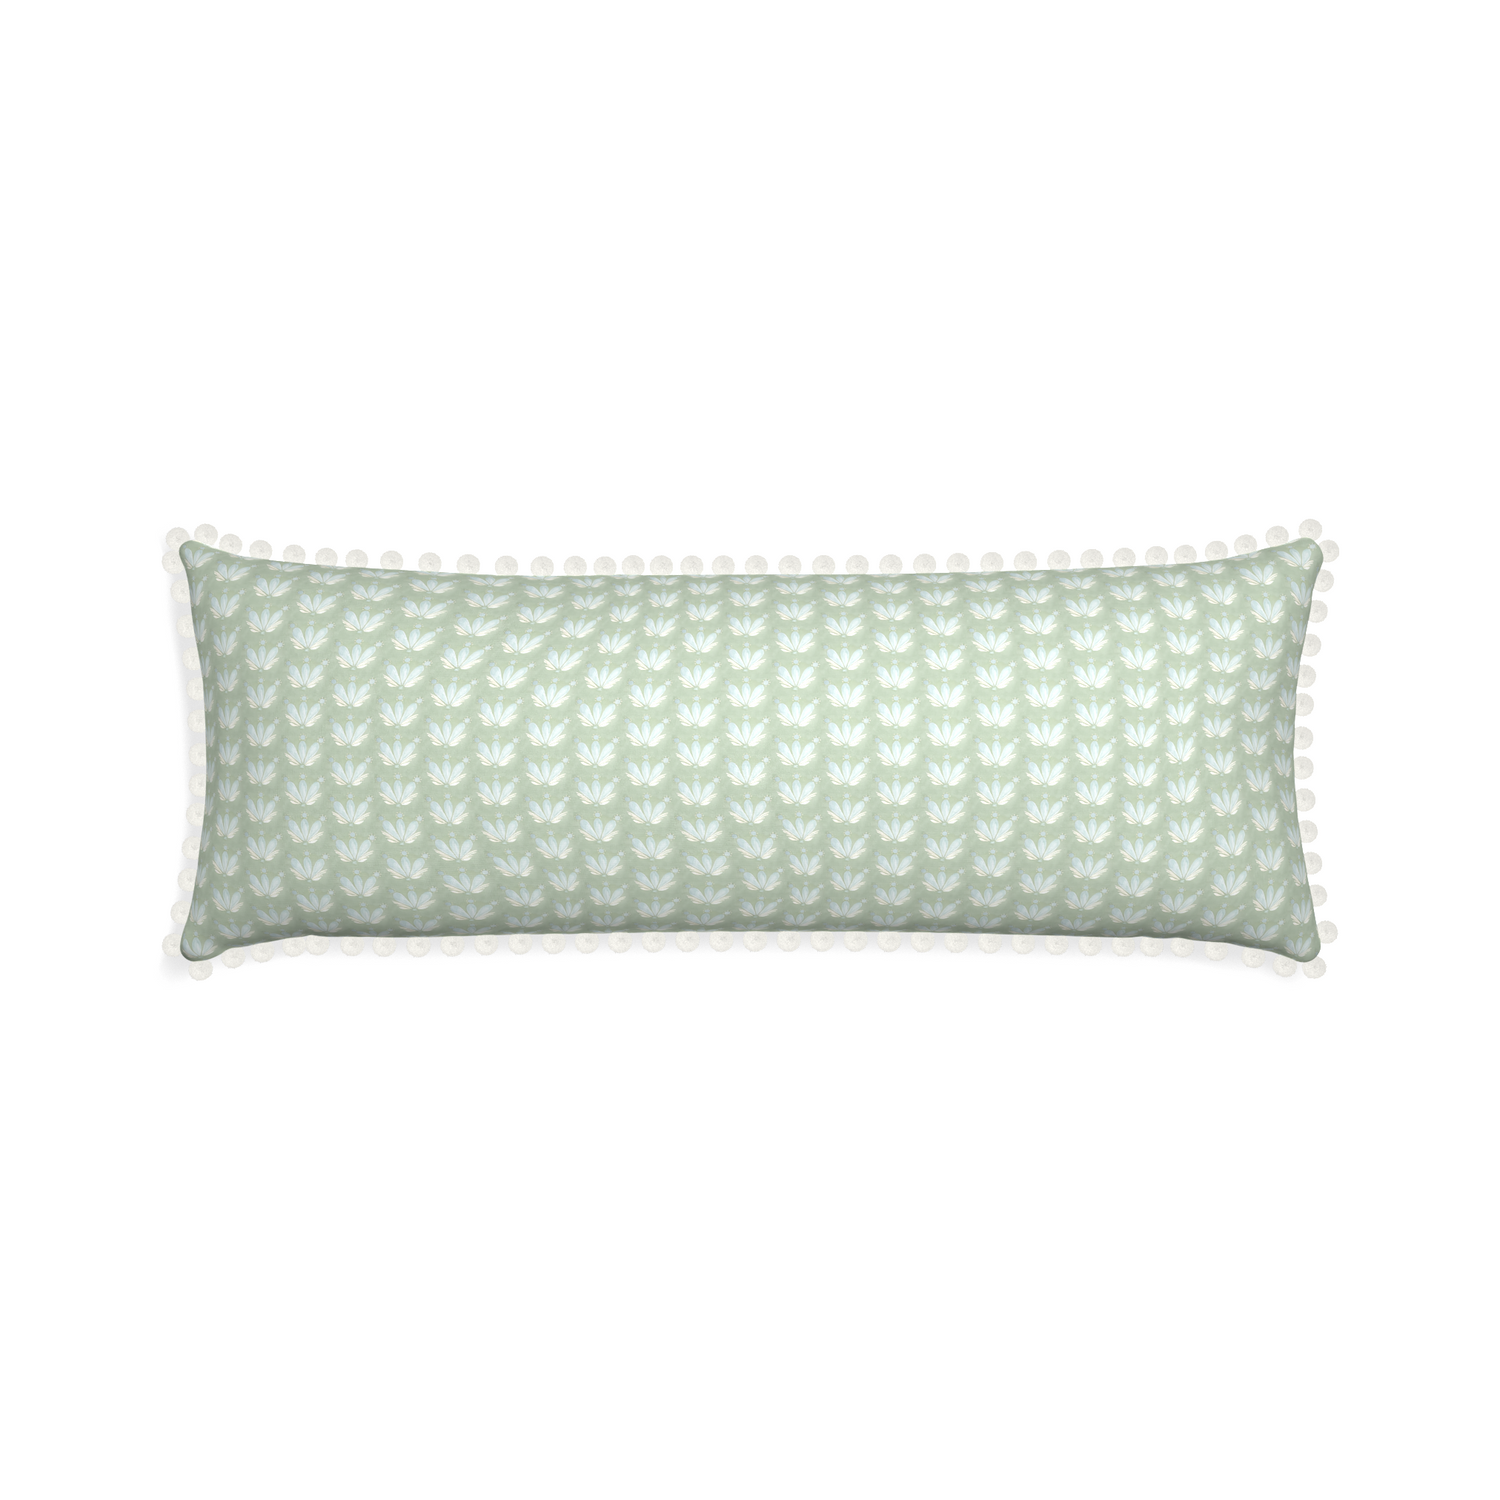 Xl-lumbar serena sea salt custom blue & green floral drop repeatpillow with snow pom pom on white background